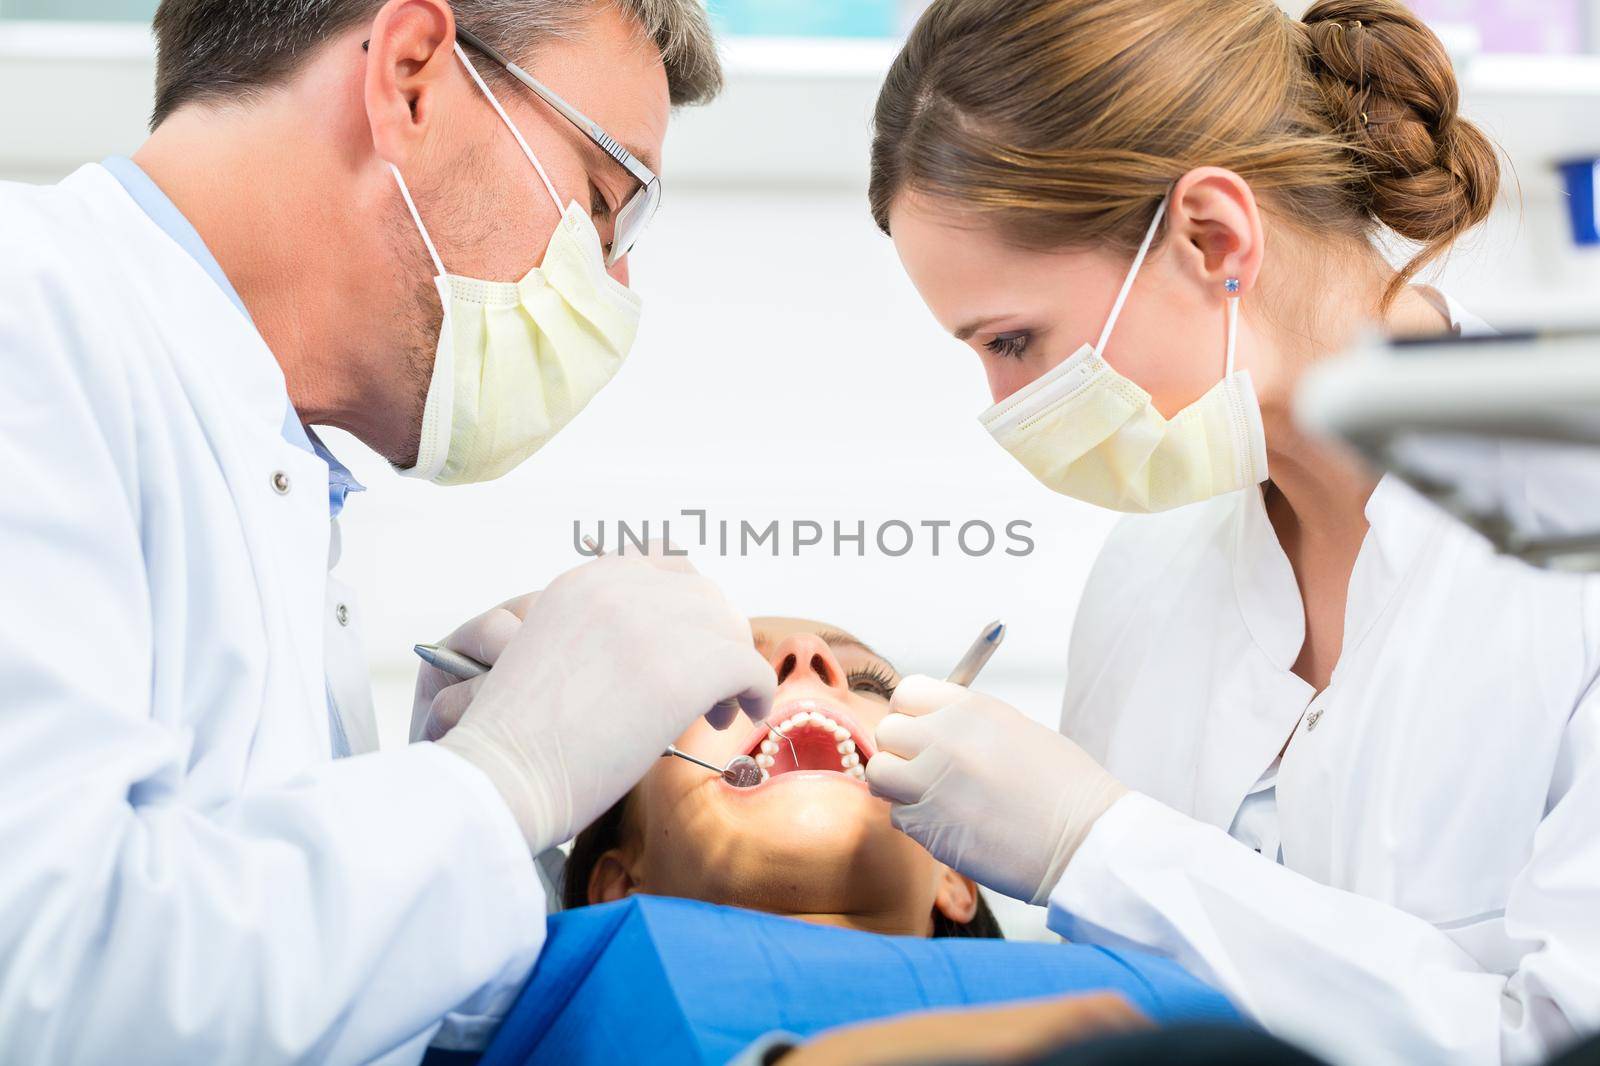 Female patient with dentist and assistant in a dental treatment, wearing masks and gloves